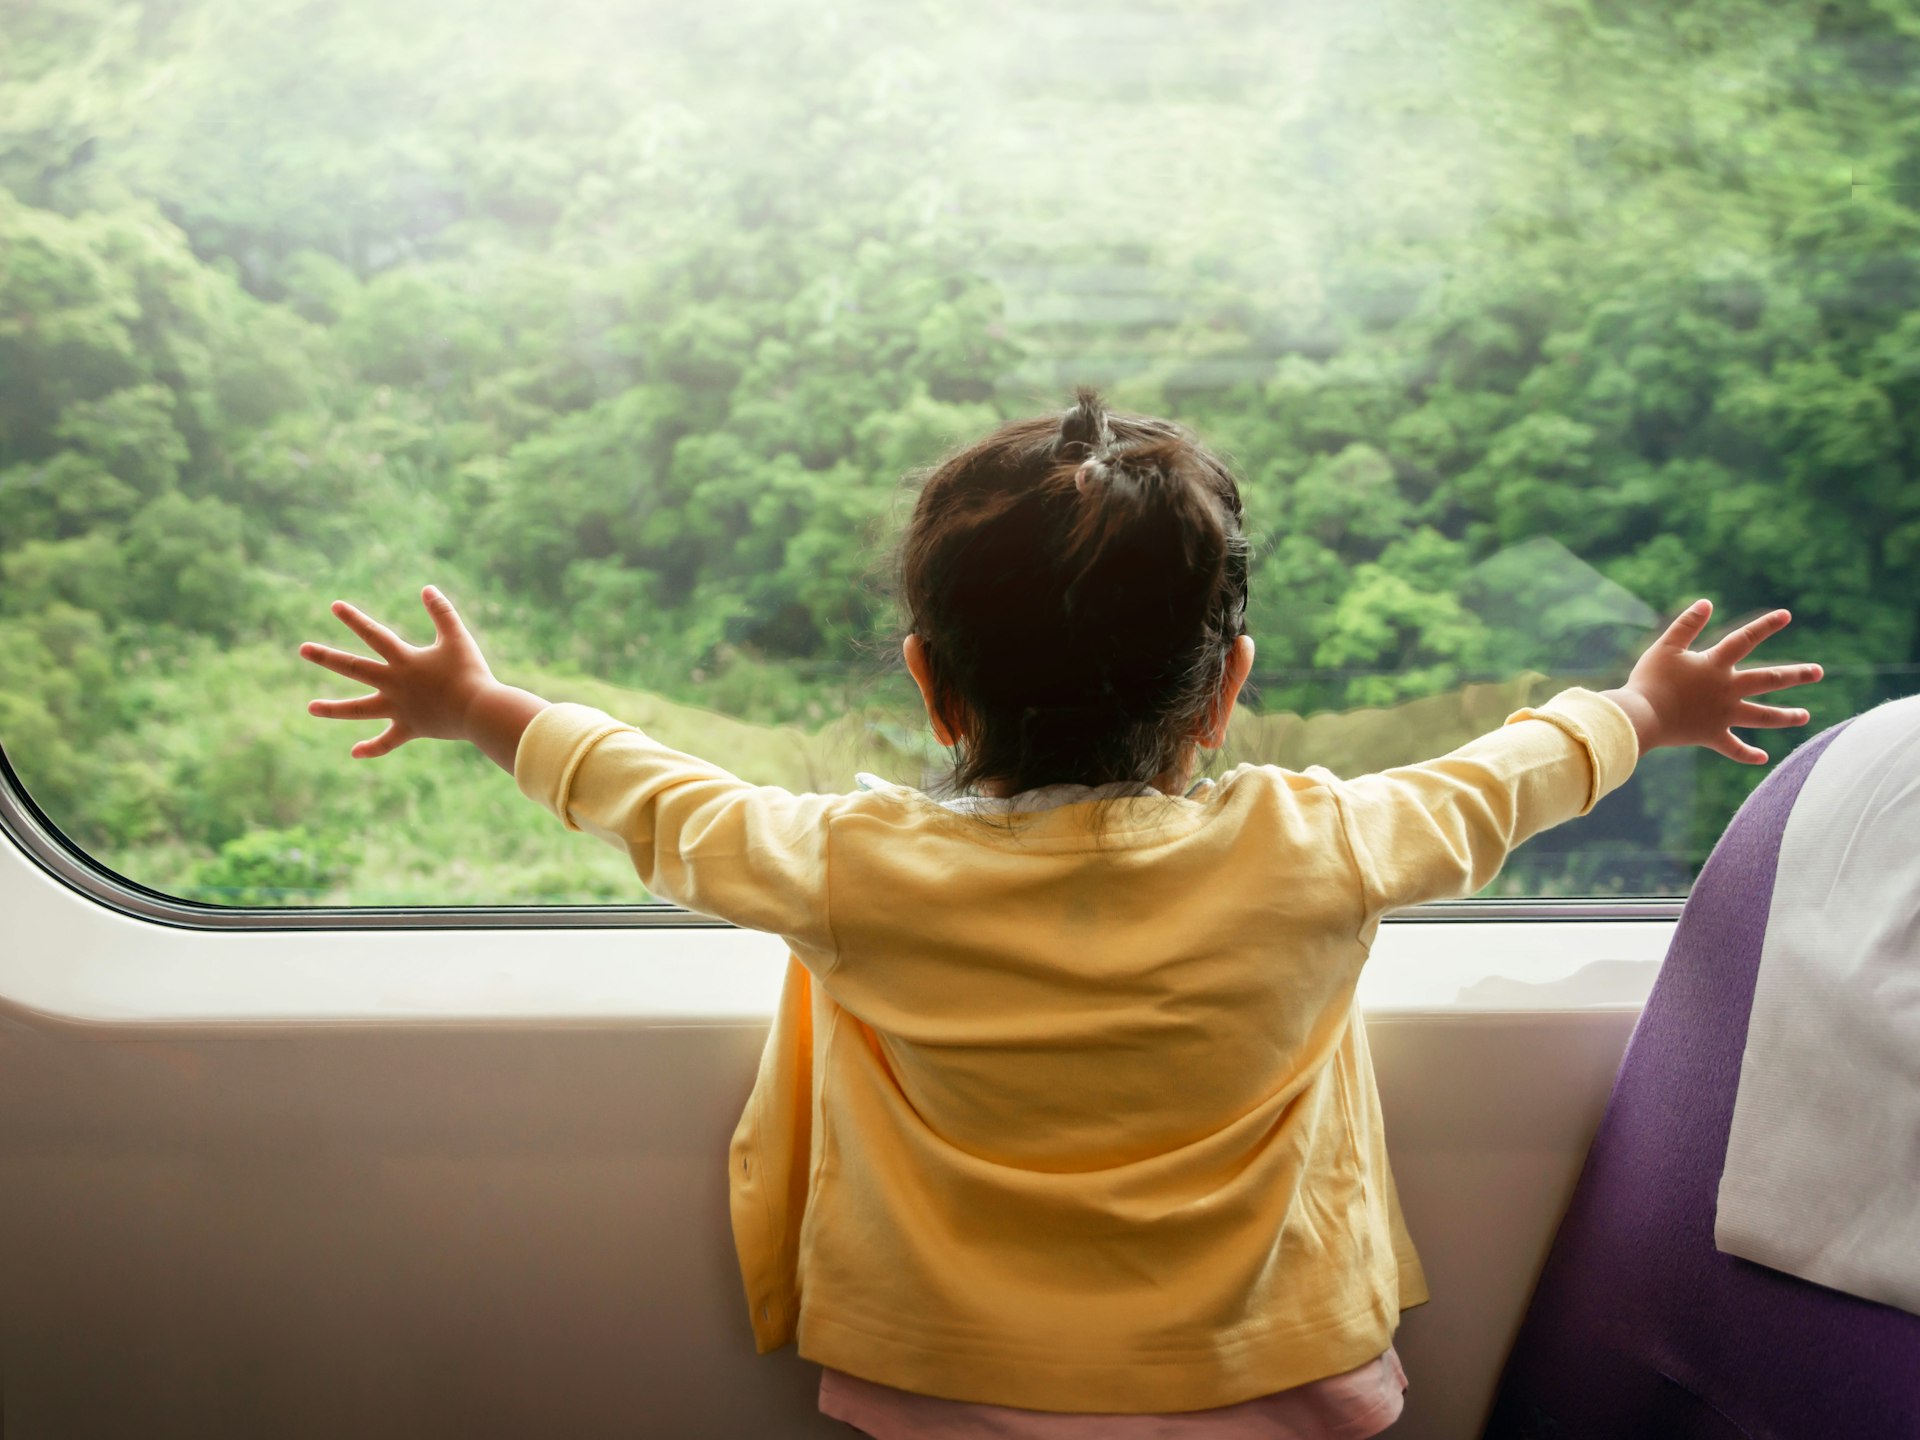 A young child with arms outstretched stares out of a train window at the passing tree-covered landscape